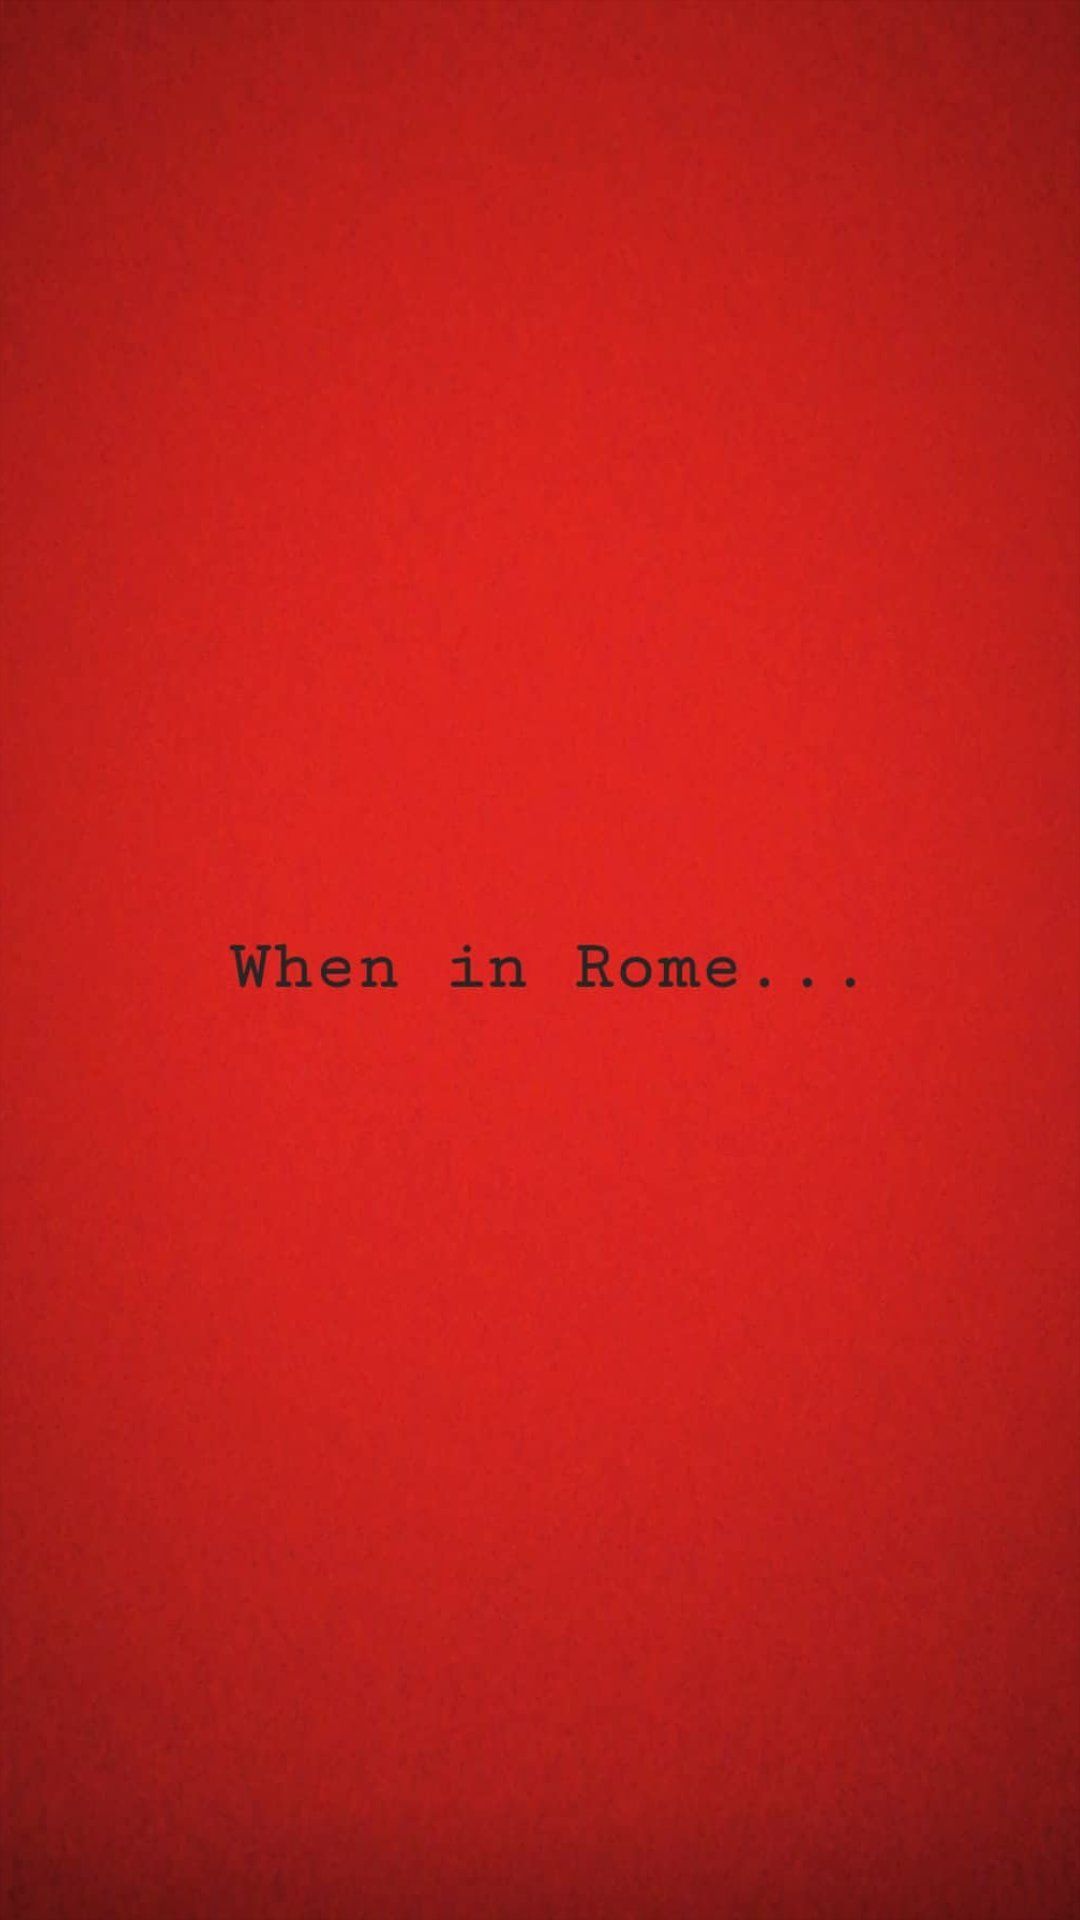 A red background with the words when in rome - Crimson